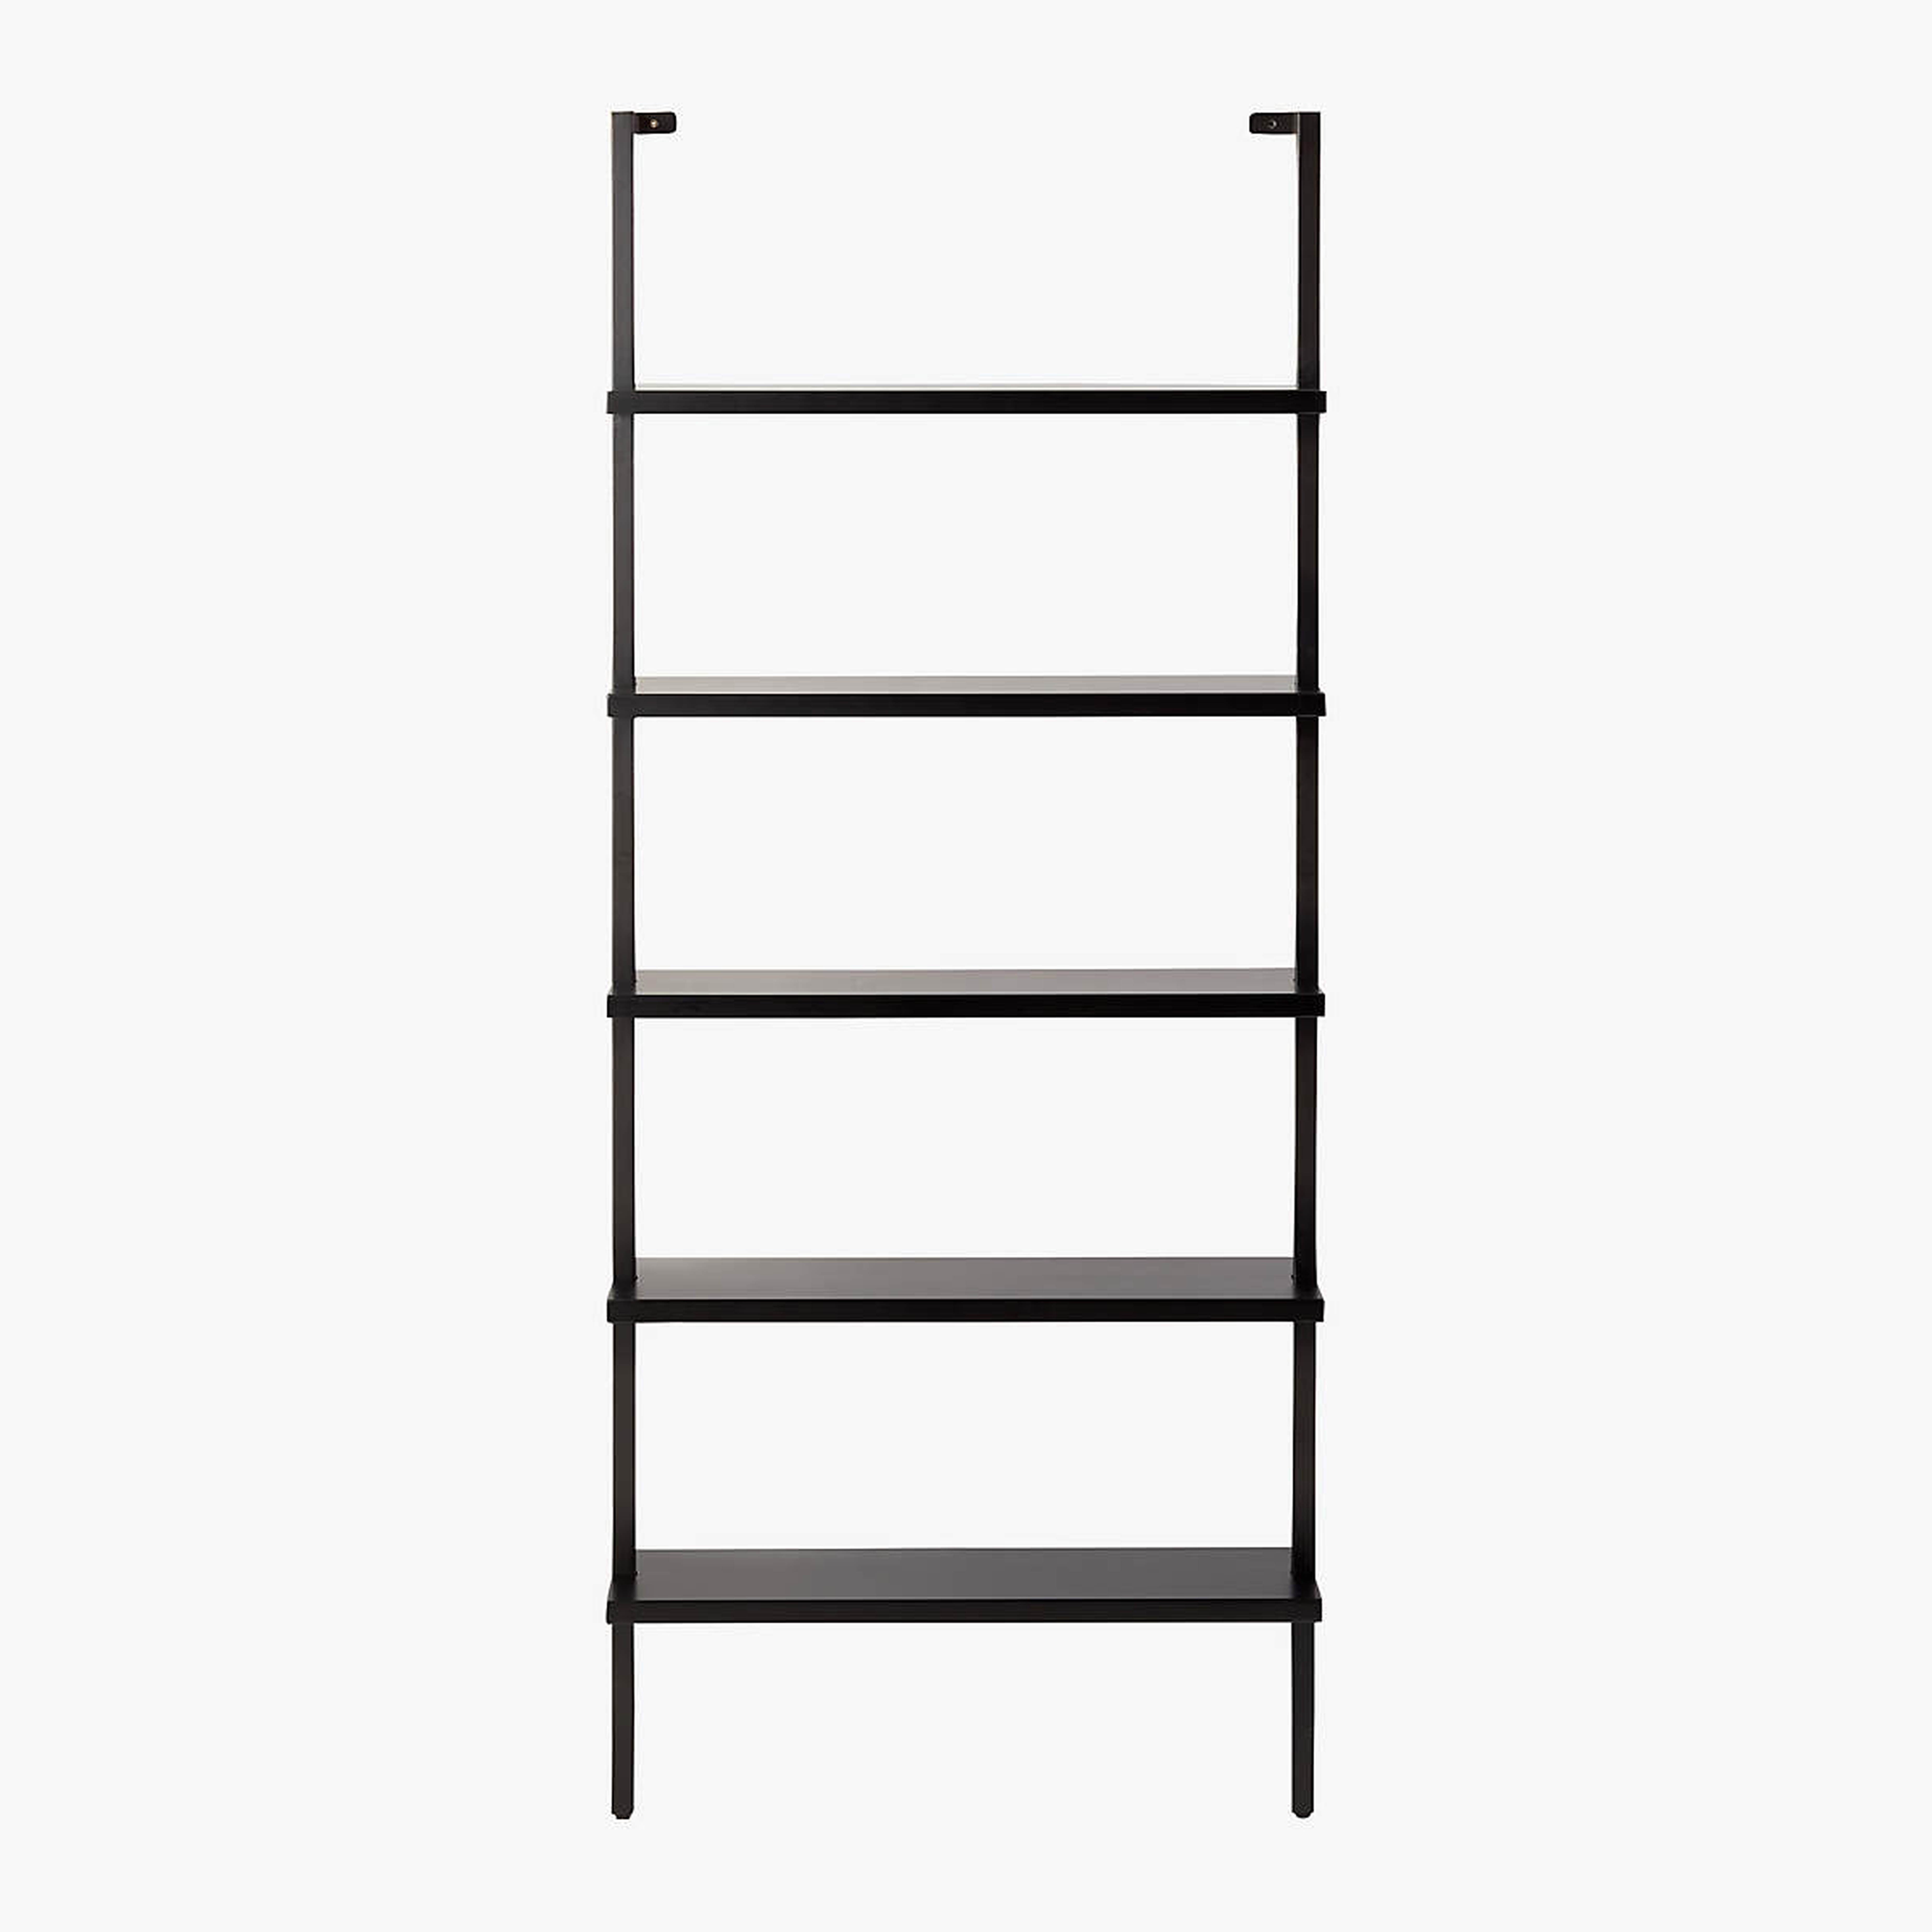 Stairway Black Wall-Mounted Bookcase - 72.5" Height - CB2